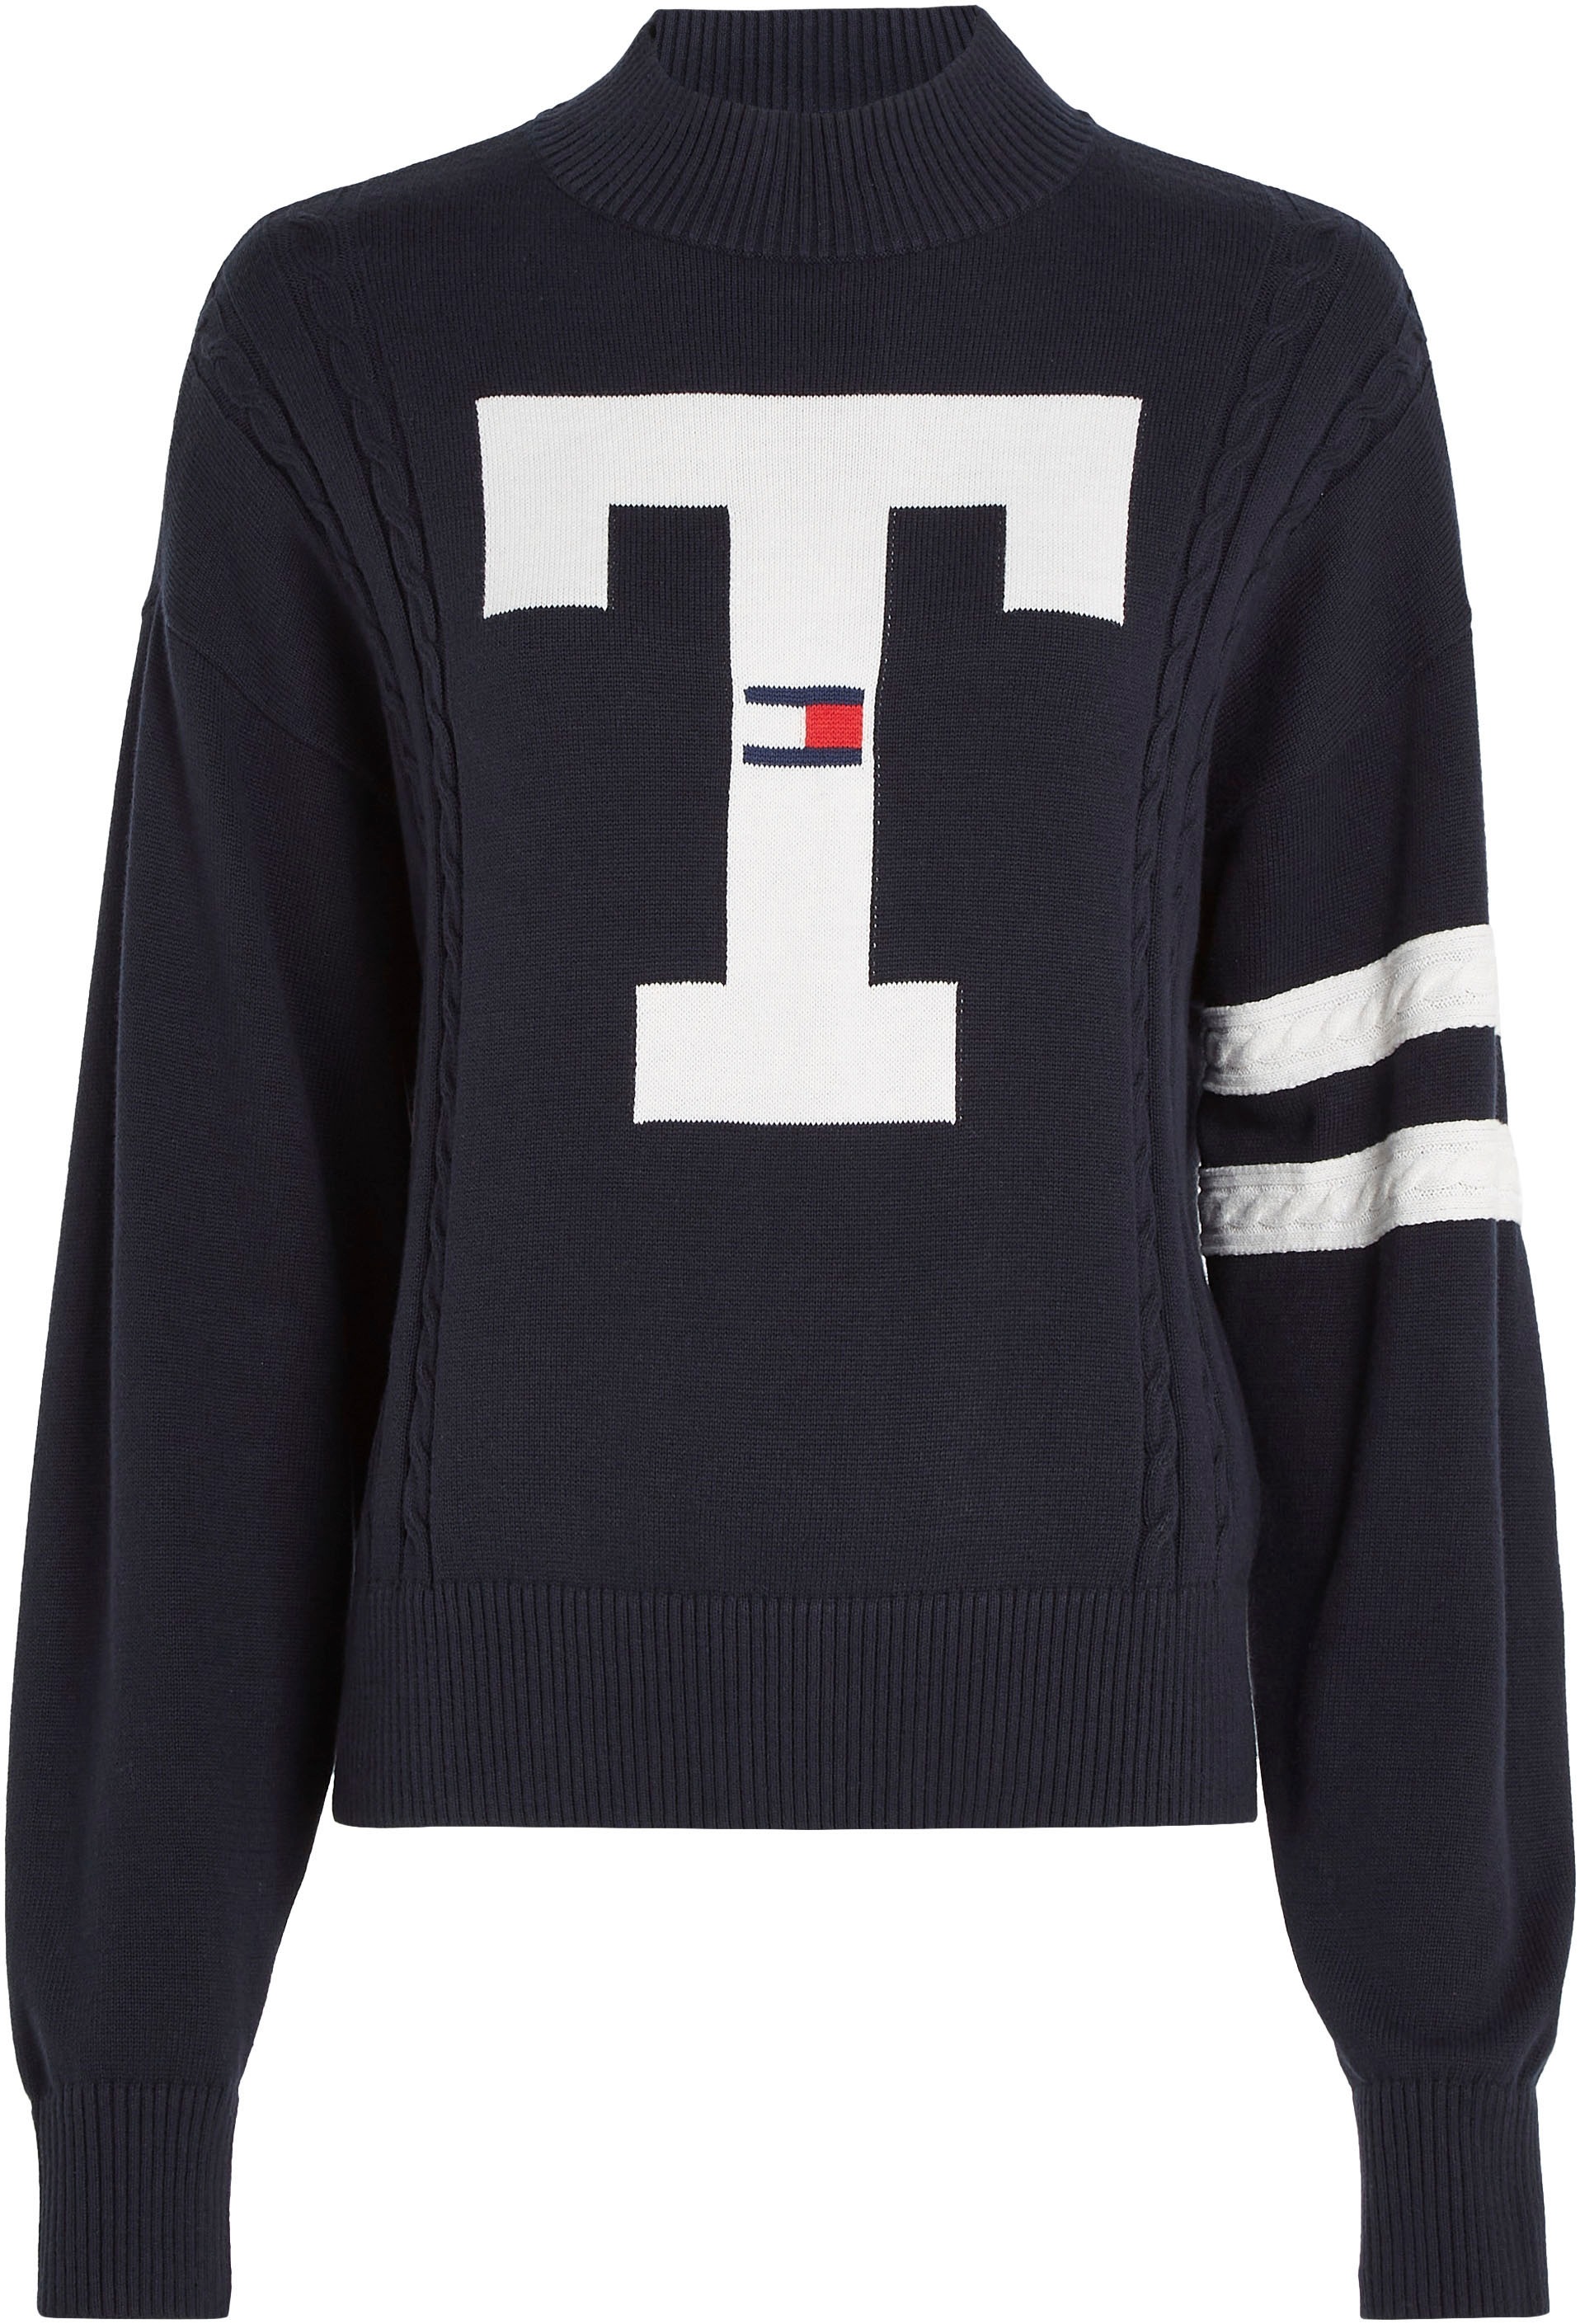 Tommy Jeans Strickpullover »TJW LETTERMAN Stickereien Patches online | und Jeans I\'m walking FLAG SWEATER«, mit Tommy